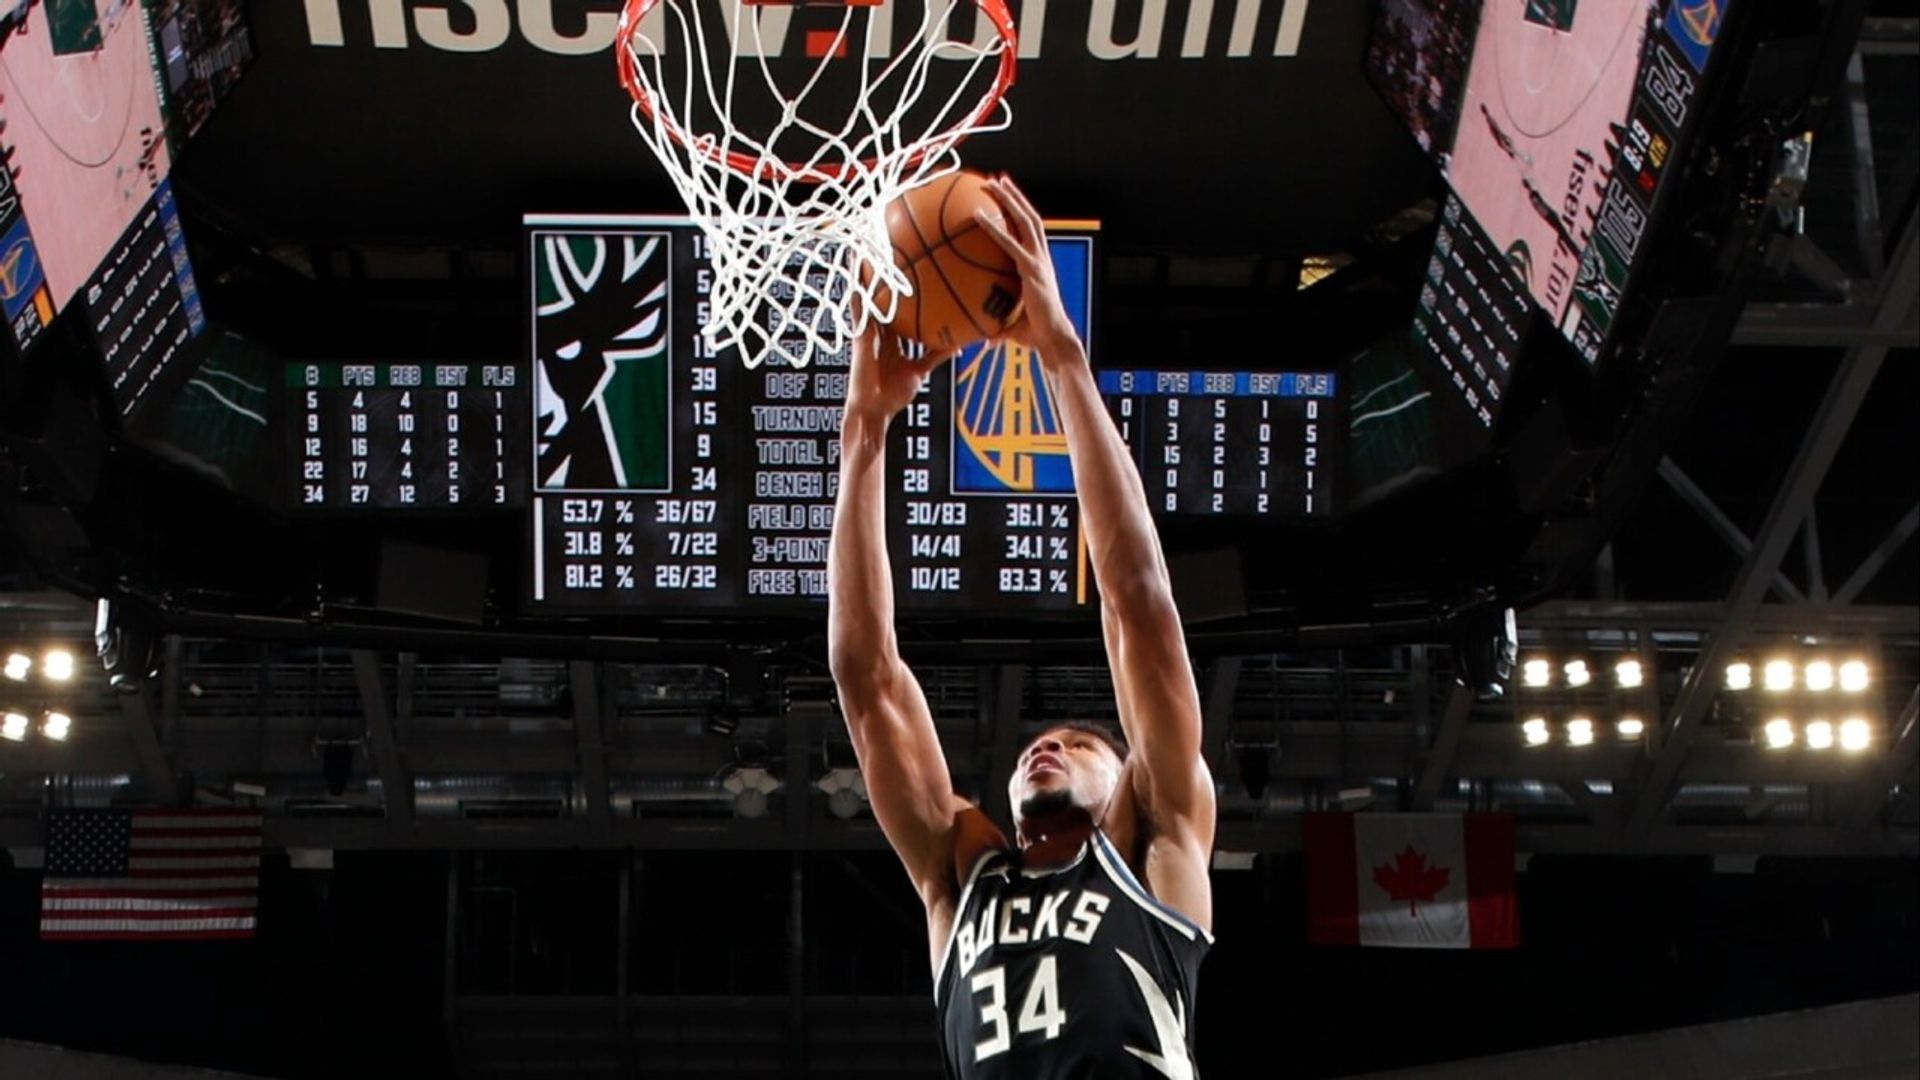 Giannis throws down monster dunk in transition